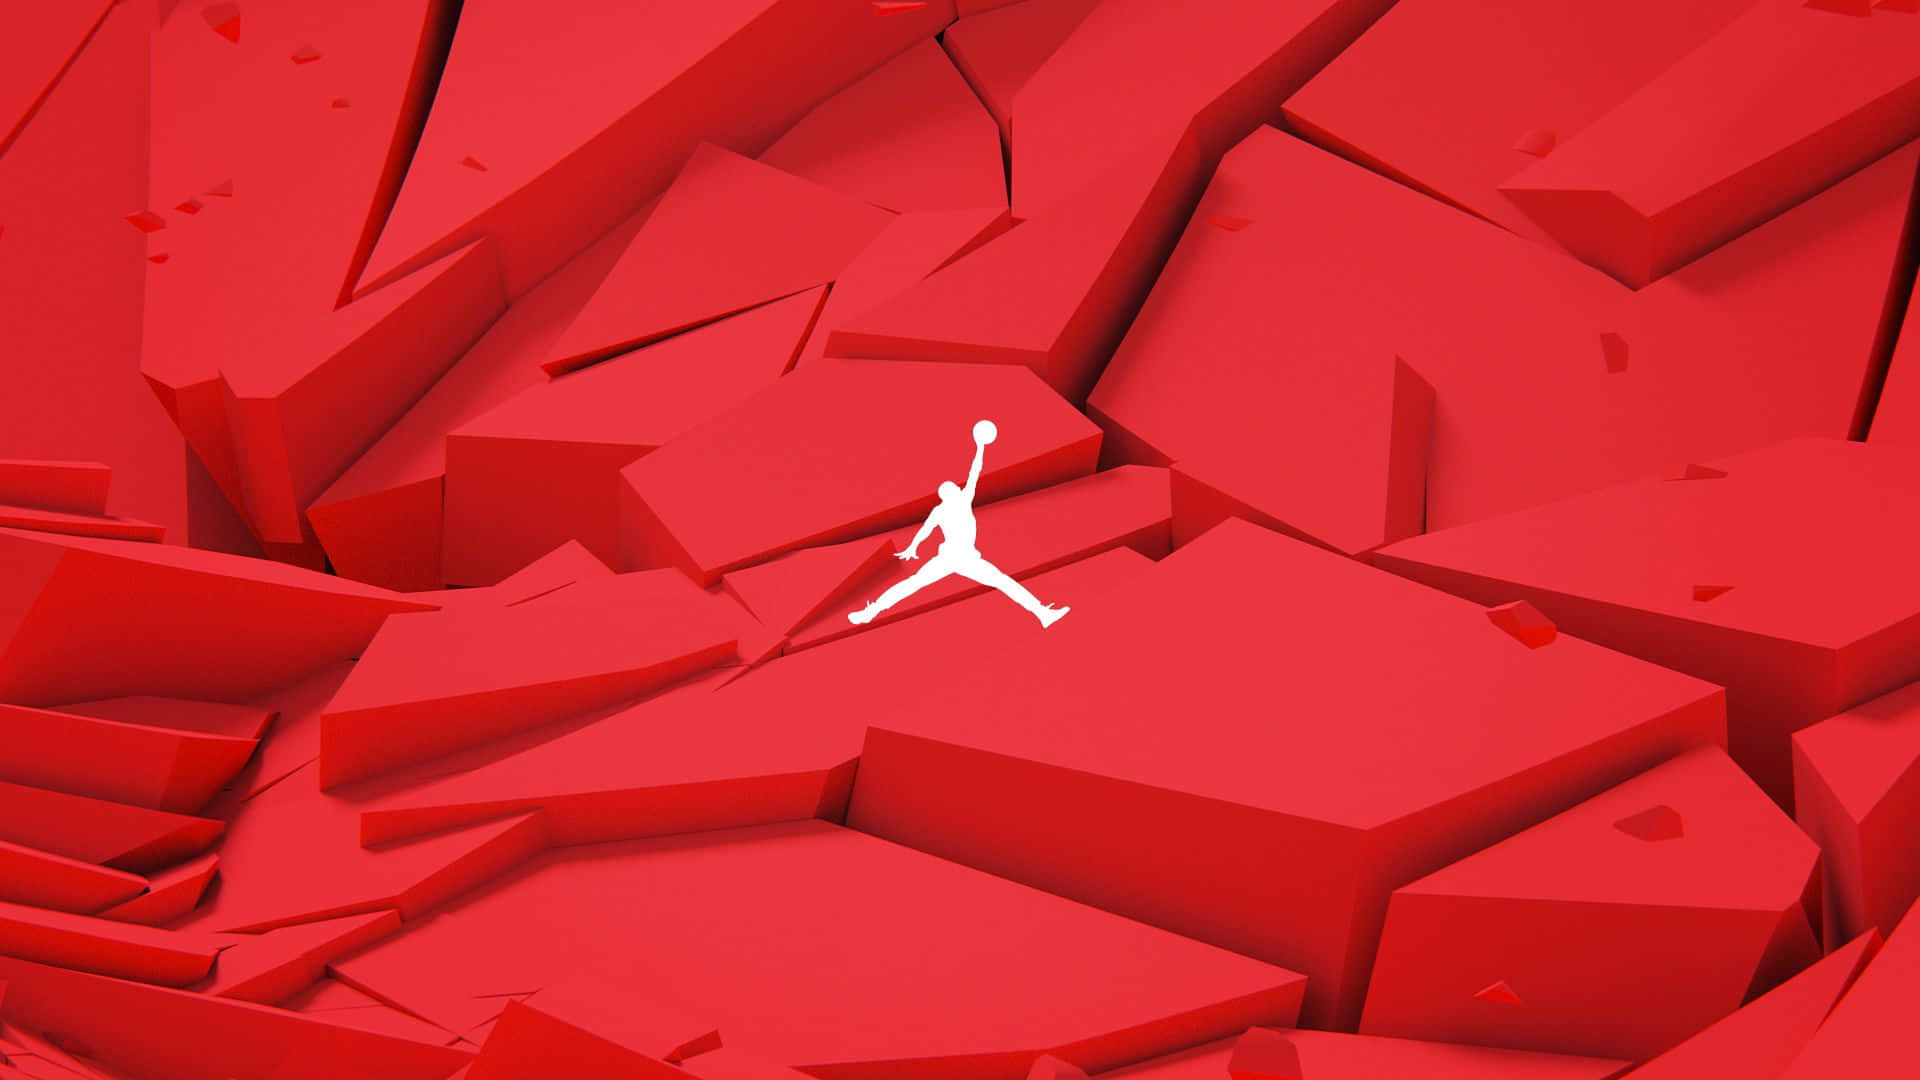 Fly Above the Crowd in Red Jordan! Wallpaper